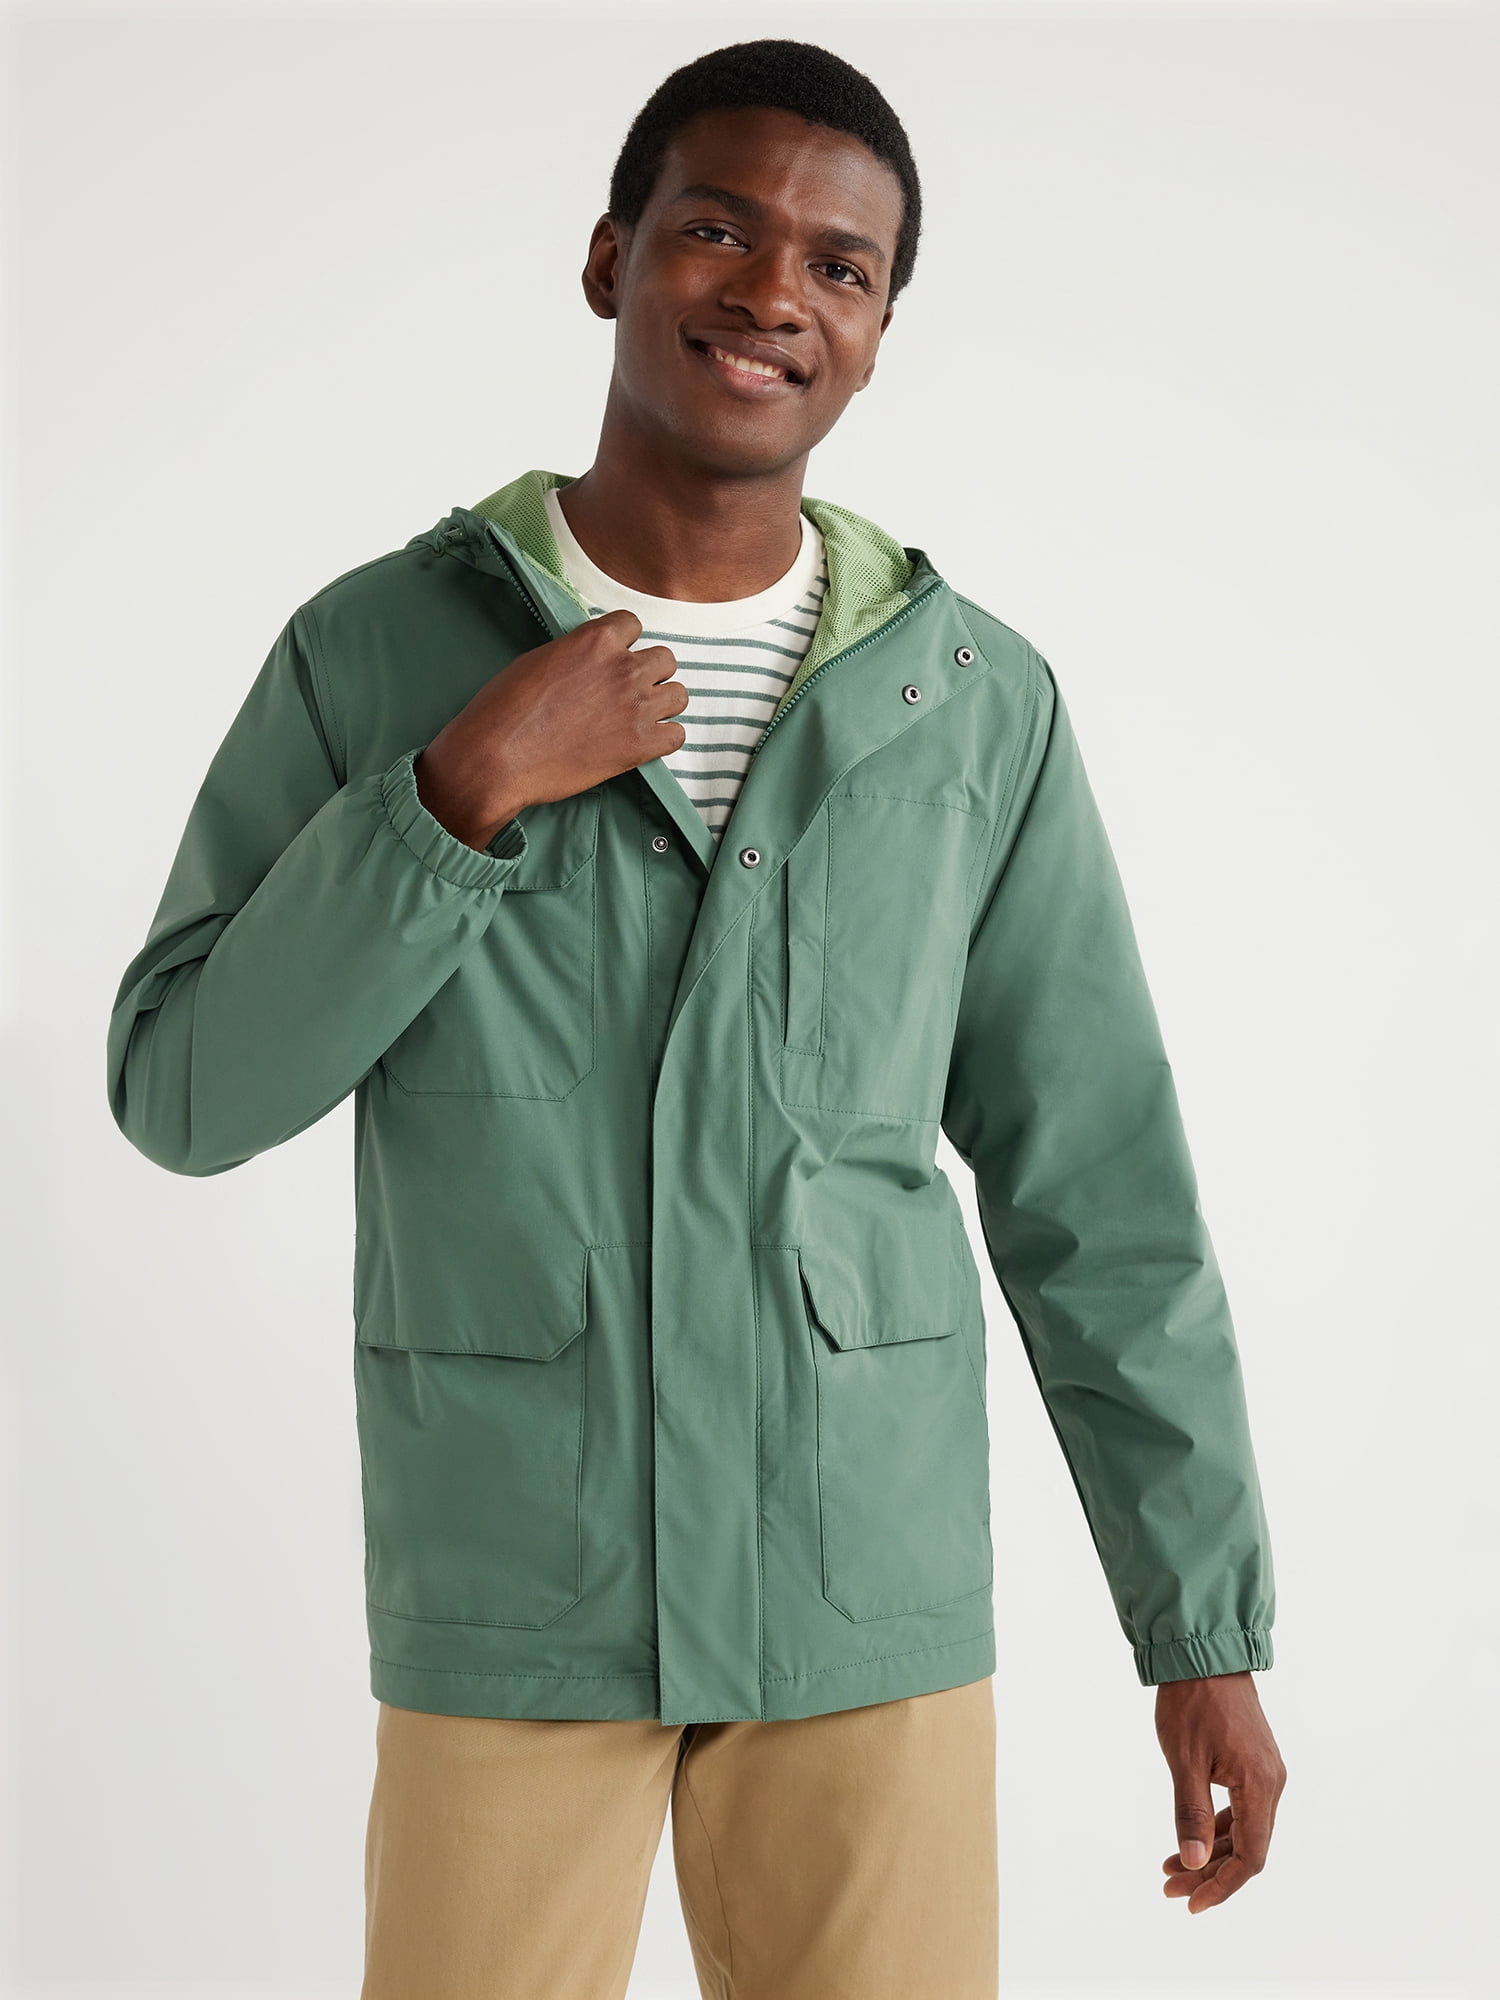 Free Assembly Men's Water Resistant Jacket with Hood, Sizes XS-3XL ...